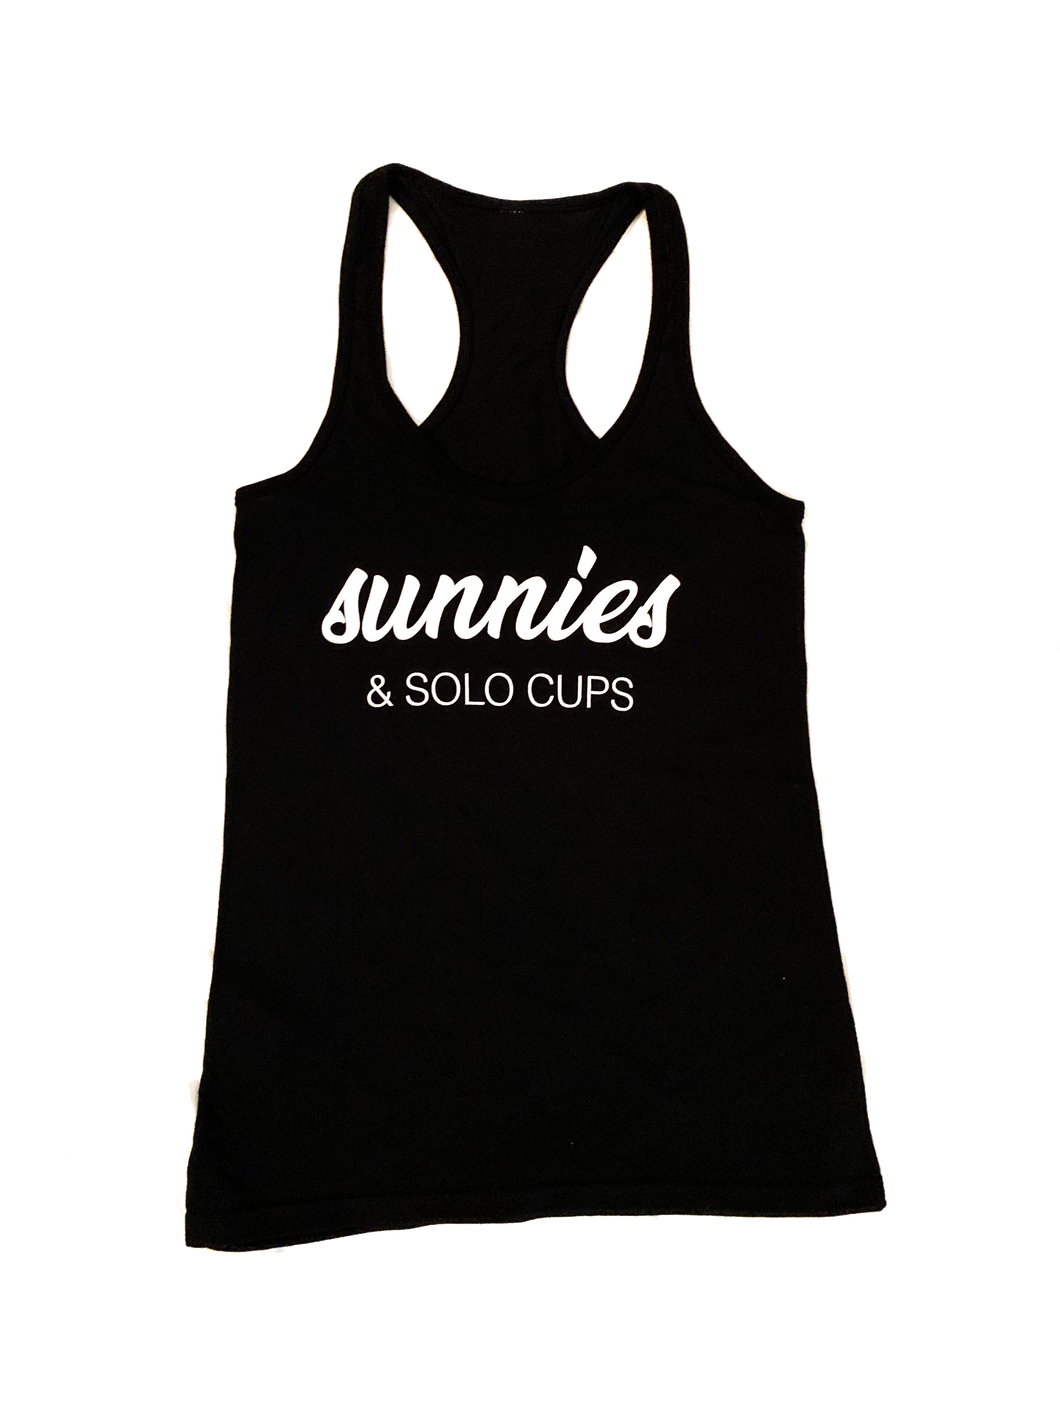 Sunnies & Solo Cups Tank